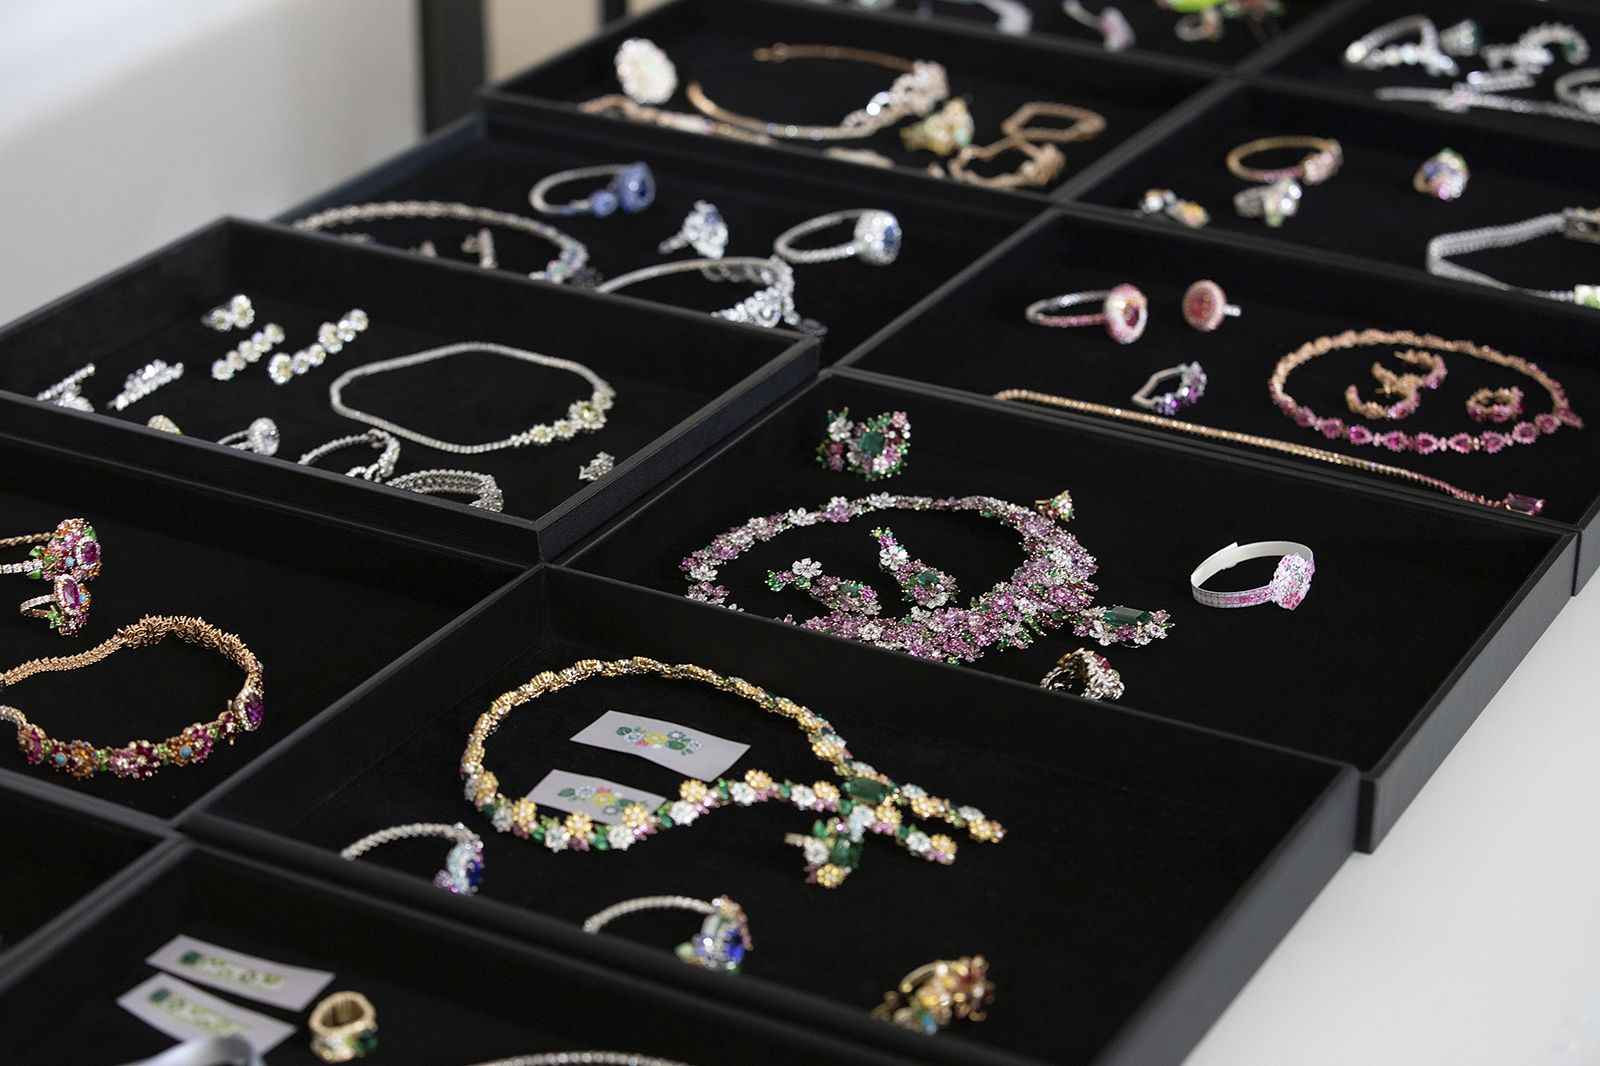 Trays displaying pieces from the Les Jardins de la Couture High Jewellery collection by Dior Joaillerie 